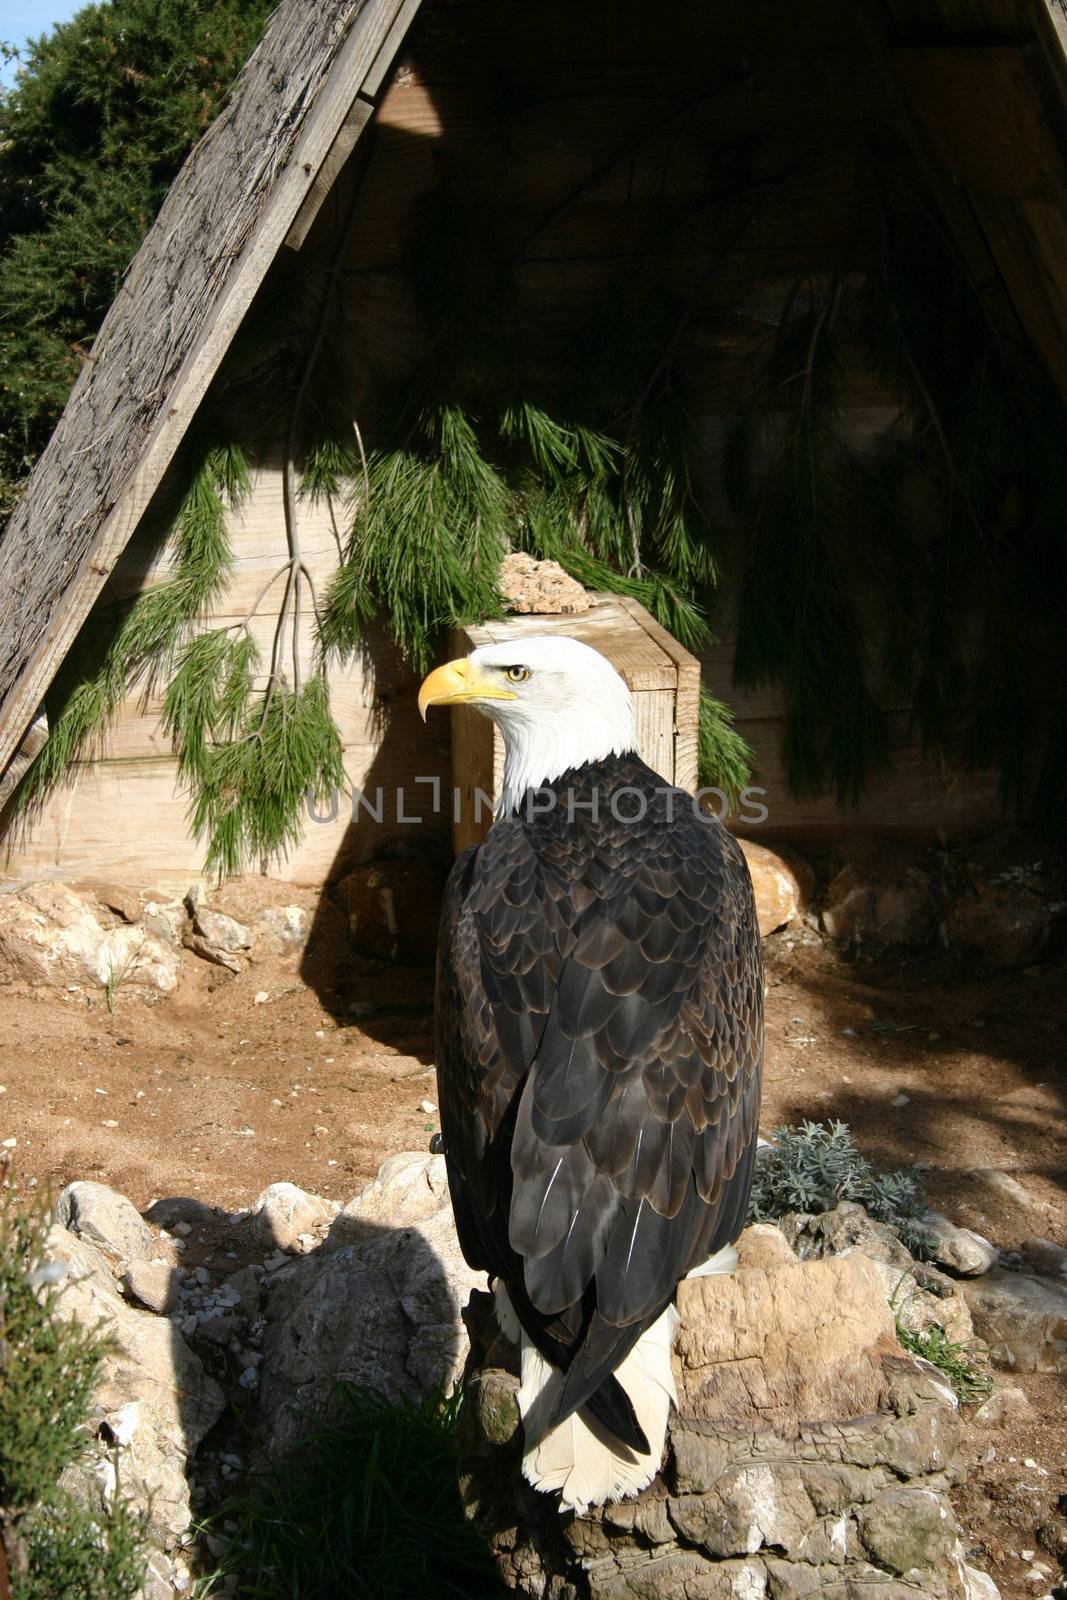 bald eagle sitting proudly on its perch